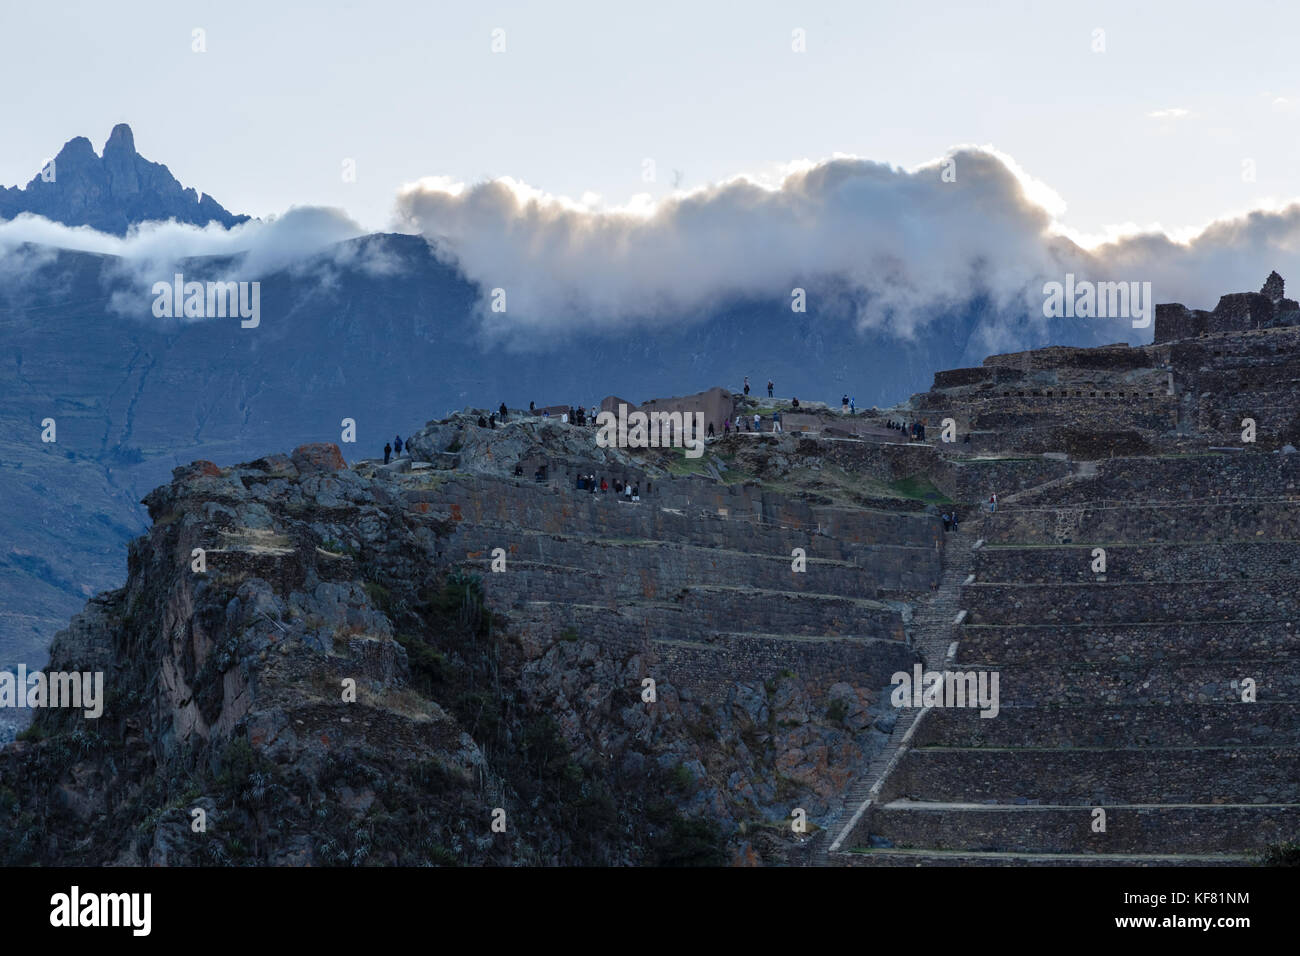 People walking on the terraces of Pumatallis, ancient Inca fortress and mountains covered in clouds, Sacred Valley, Ollantaytambo, Peru Stock Photo